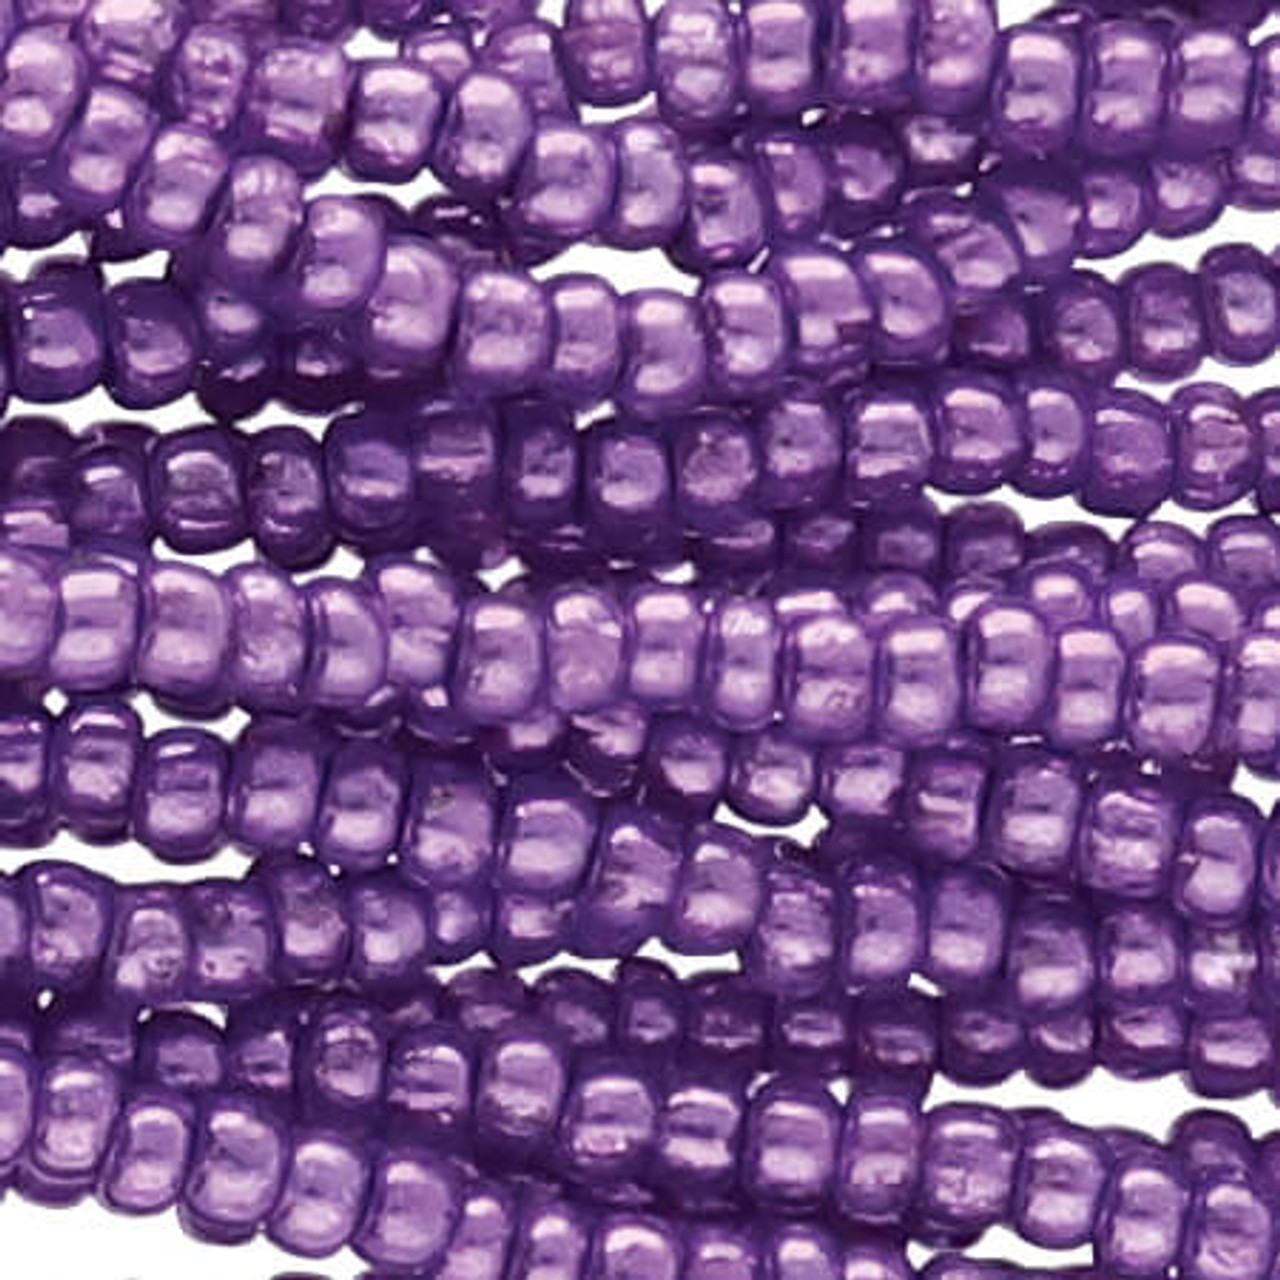 Thebeadchest Translucent Purple Matte Glass Seed Beads (4mm) - 24 inch Strand of Quality Glass Beads, Adult Unisex, Size: 4 mm